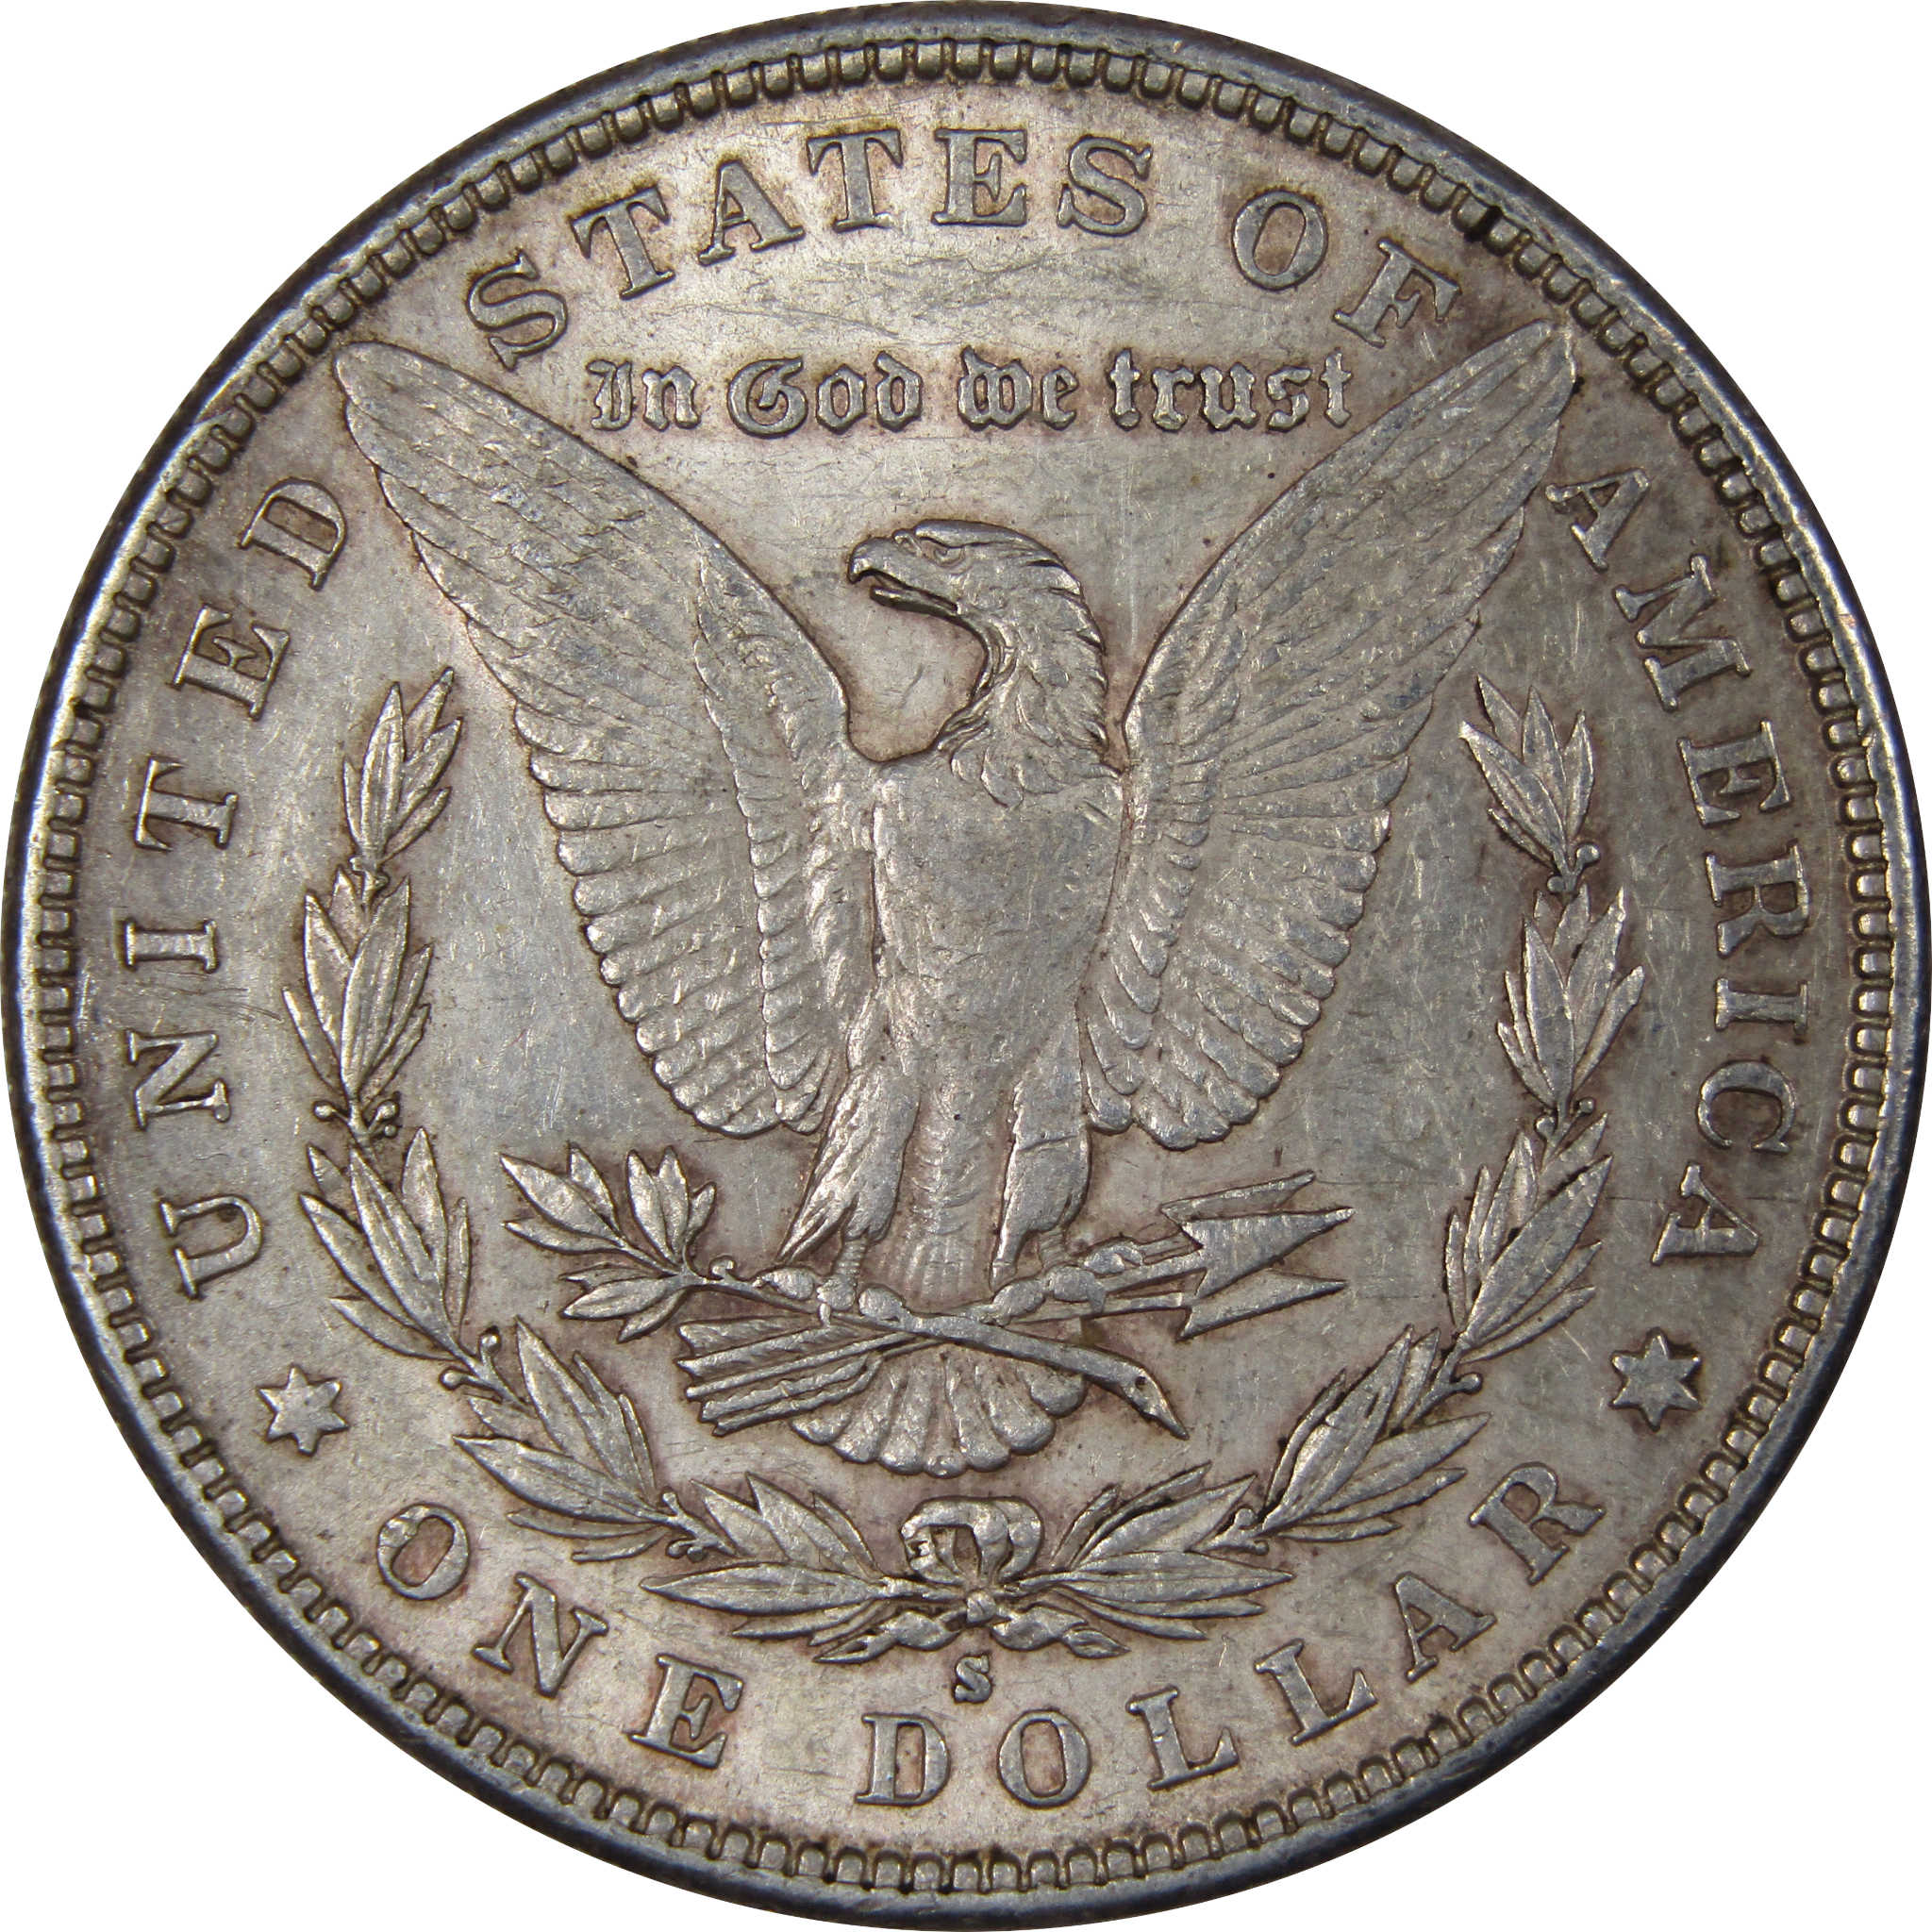 1888 S Morgan Dollar AU About Uncirculated 90% Silver SKU:IPC7981 - Morgan coin - Morgan silver dollar - Morgan silver dollar for sale - Profile Coins &amp; Collectibles